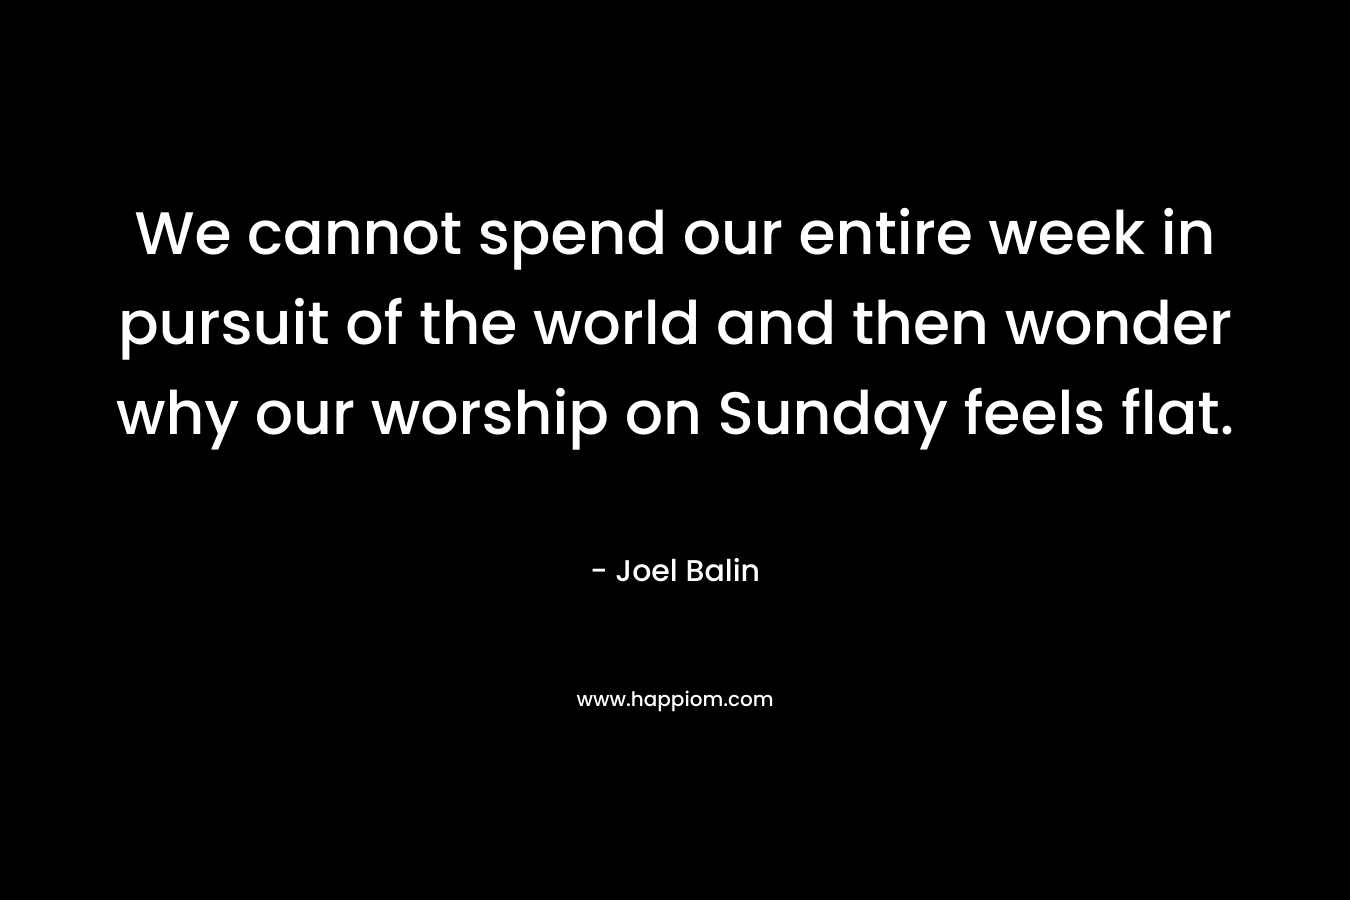 We cannot spend our entire week in pursuit of the world and then wonder why our worship on Sunday feels flat. – Joel Balin